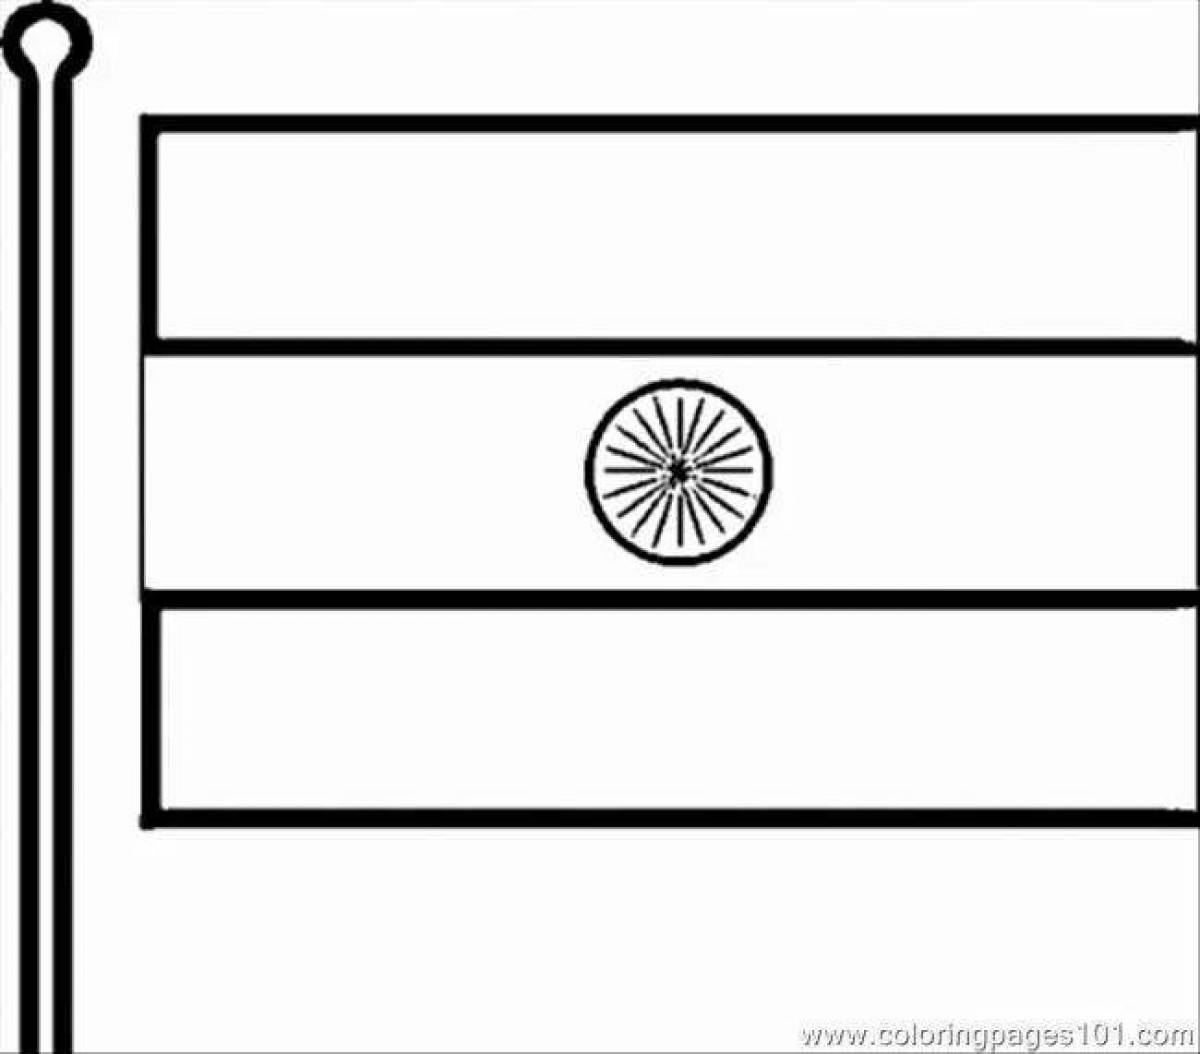 Coloring page glorious flag of india